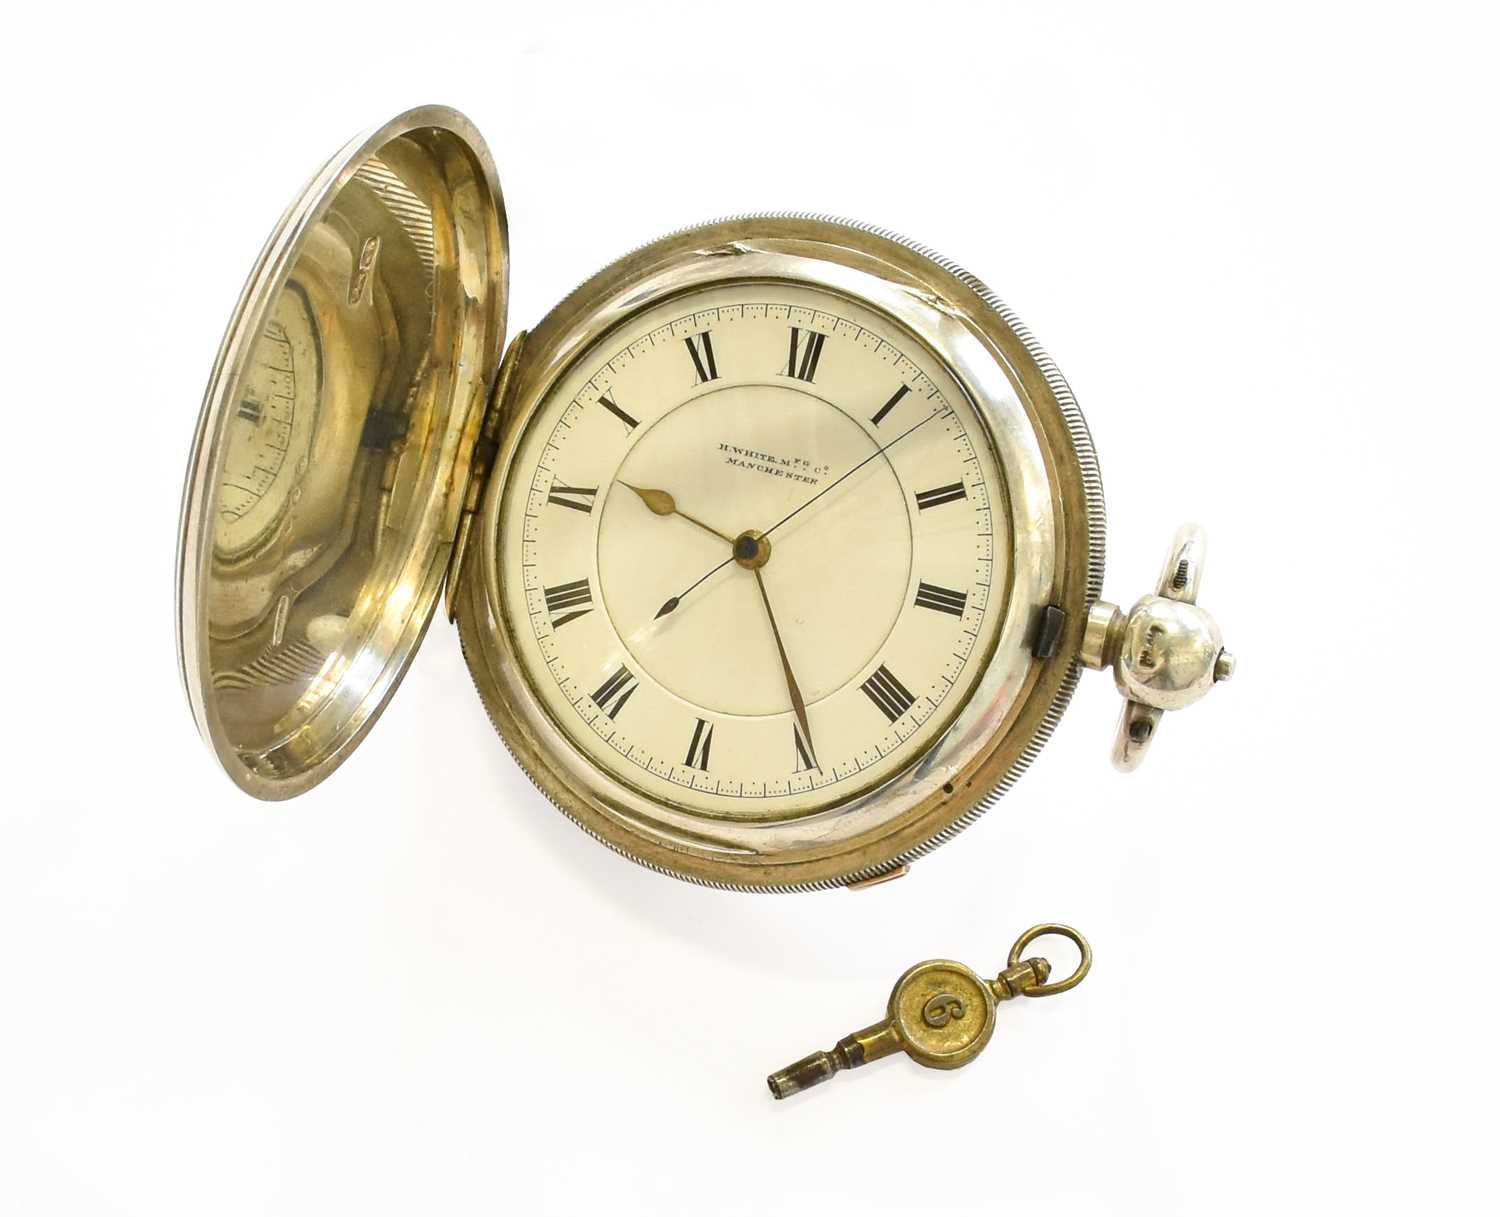 A Silver Full Hunter Chronograph Pocket Watch, retailed by H.White, Manchester